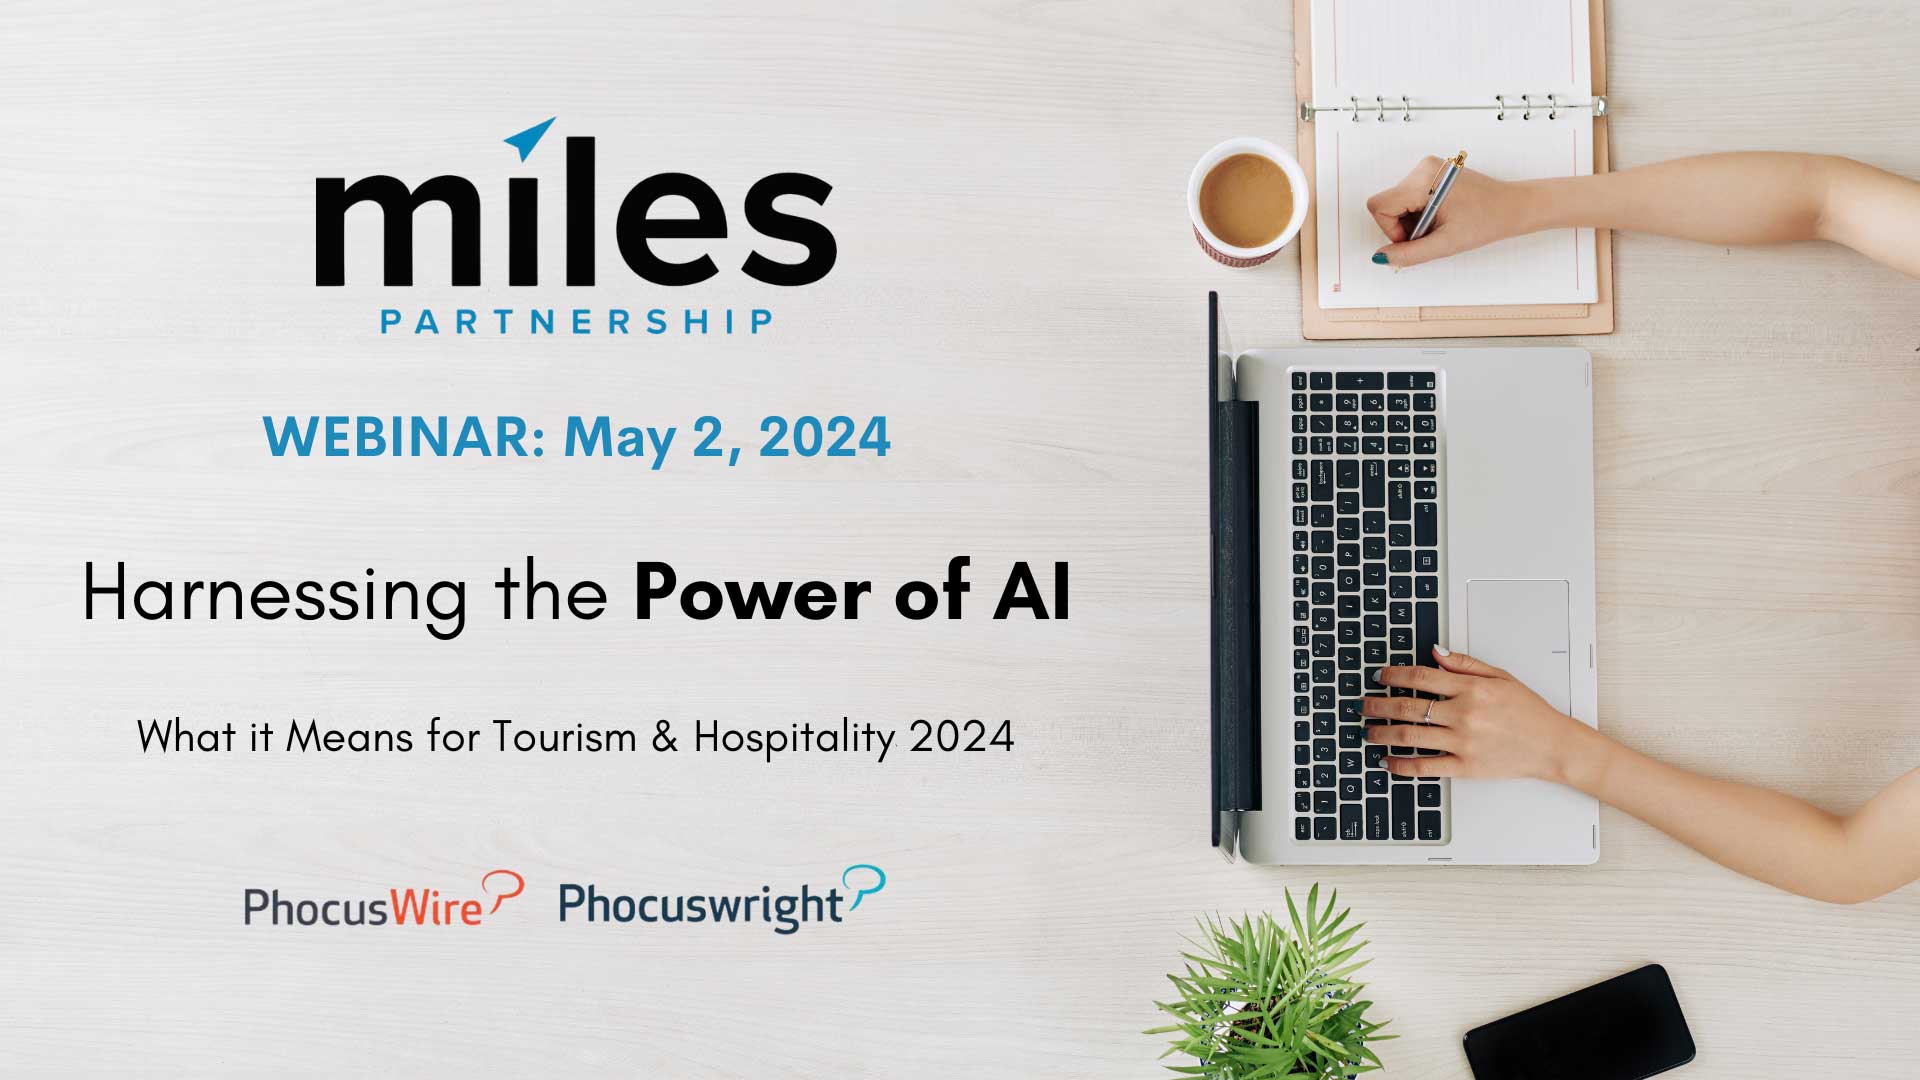 Harnessing the Power of AI - Webinar with Miles Partnership